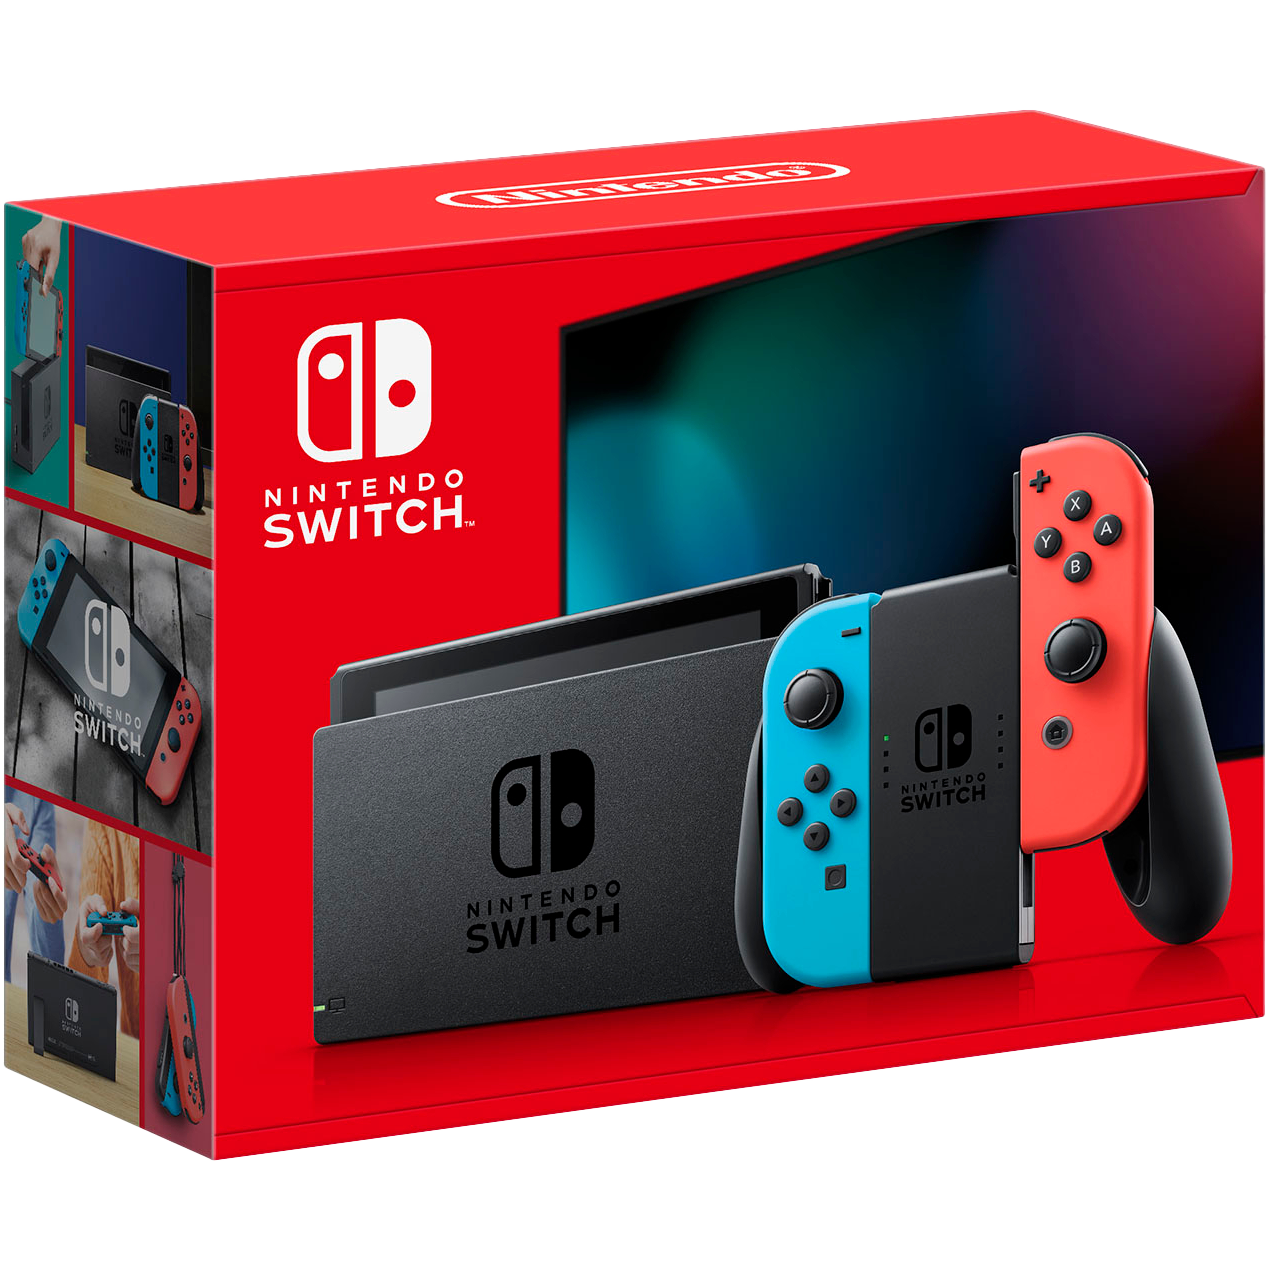 Retail box for the standard Nintendo Switch model with Red and Blue Joy-Con